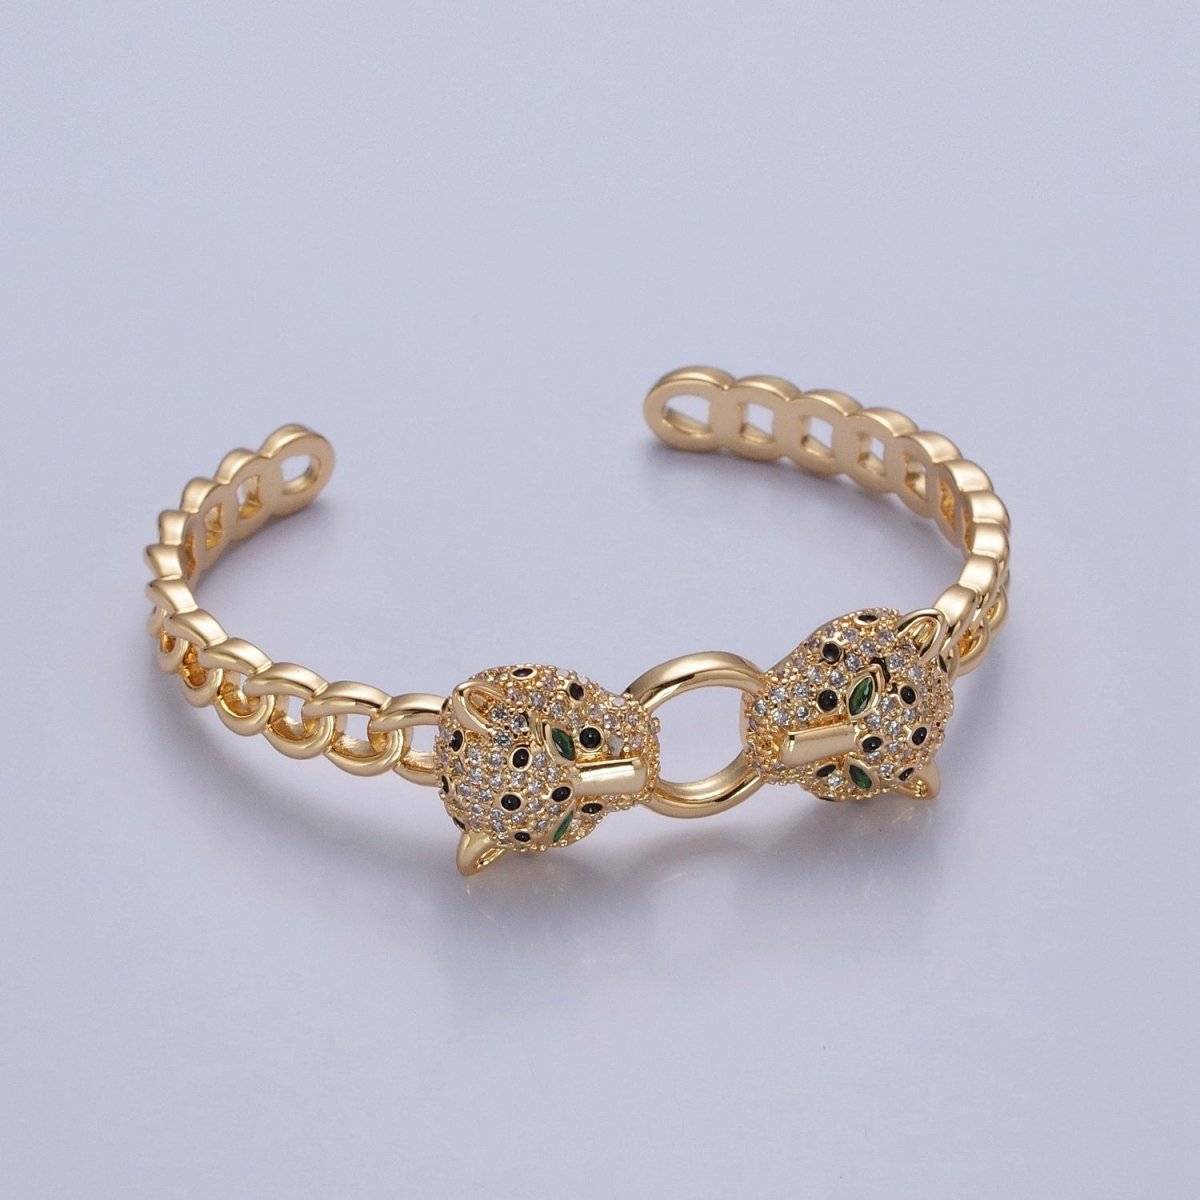 24K Gold Filled Micro Pave CZ Panther with Curb Chain Link Bangle Bracelet | WA-976 WA-977 Clearance Pricing - DLUXCA